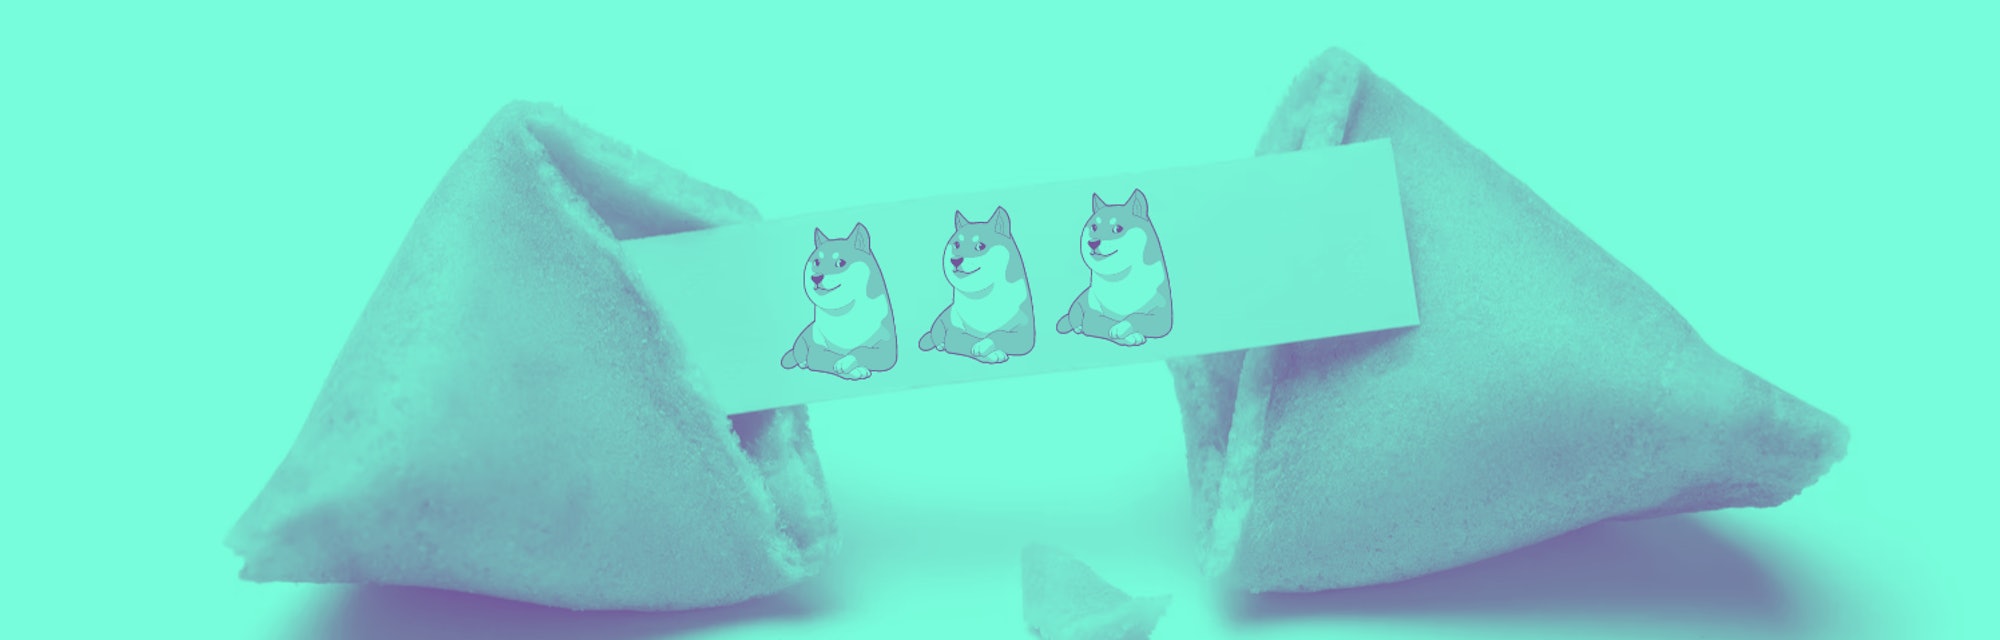 Shutterstock image of fortune cookie with three Dogecoin dogs on fortune